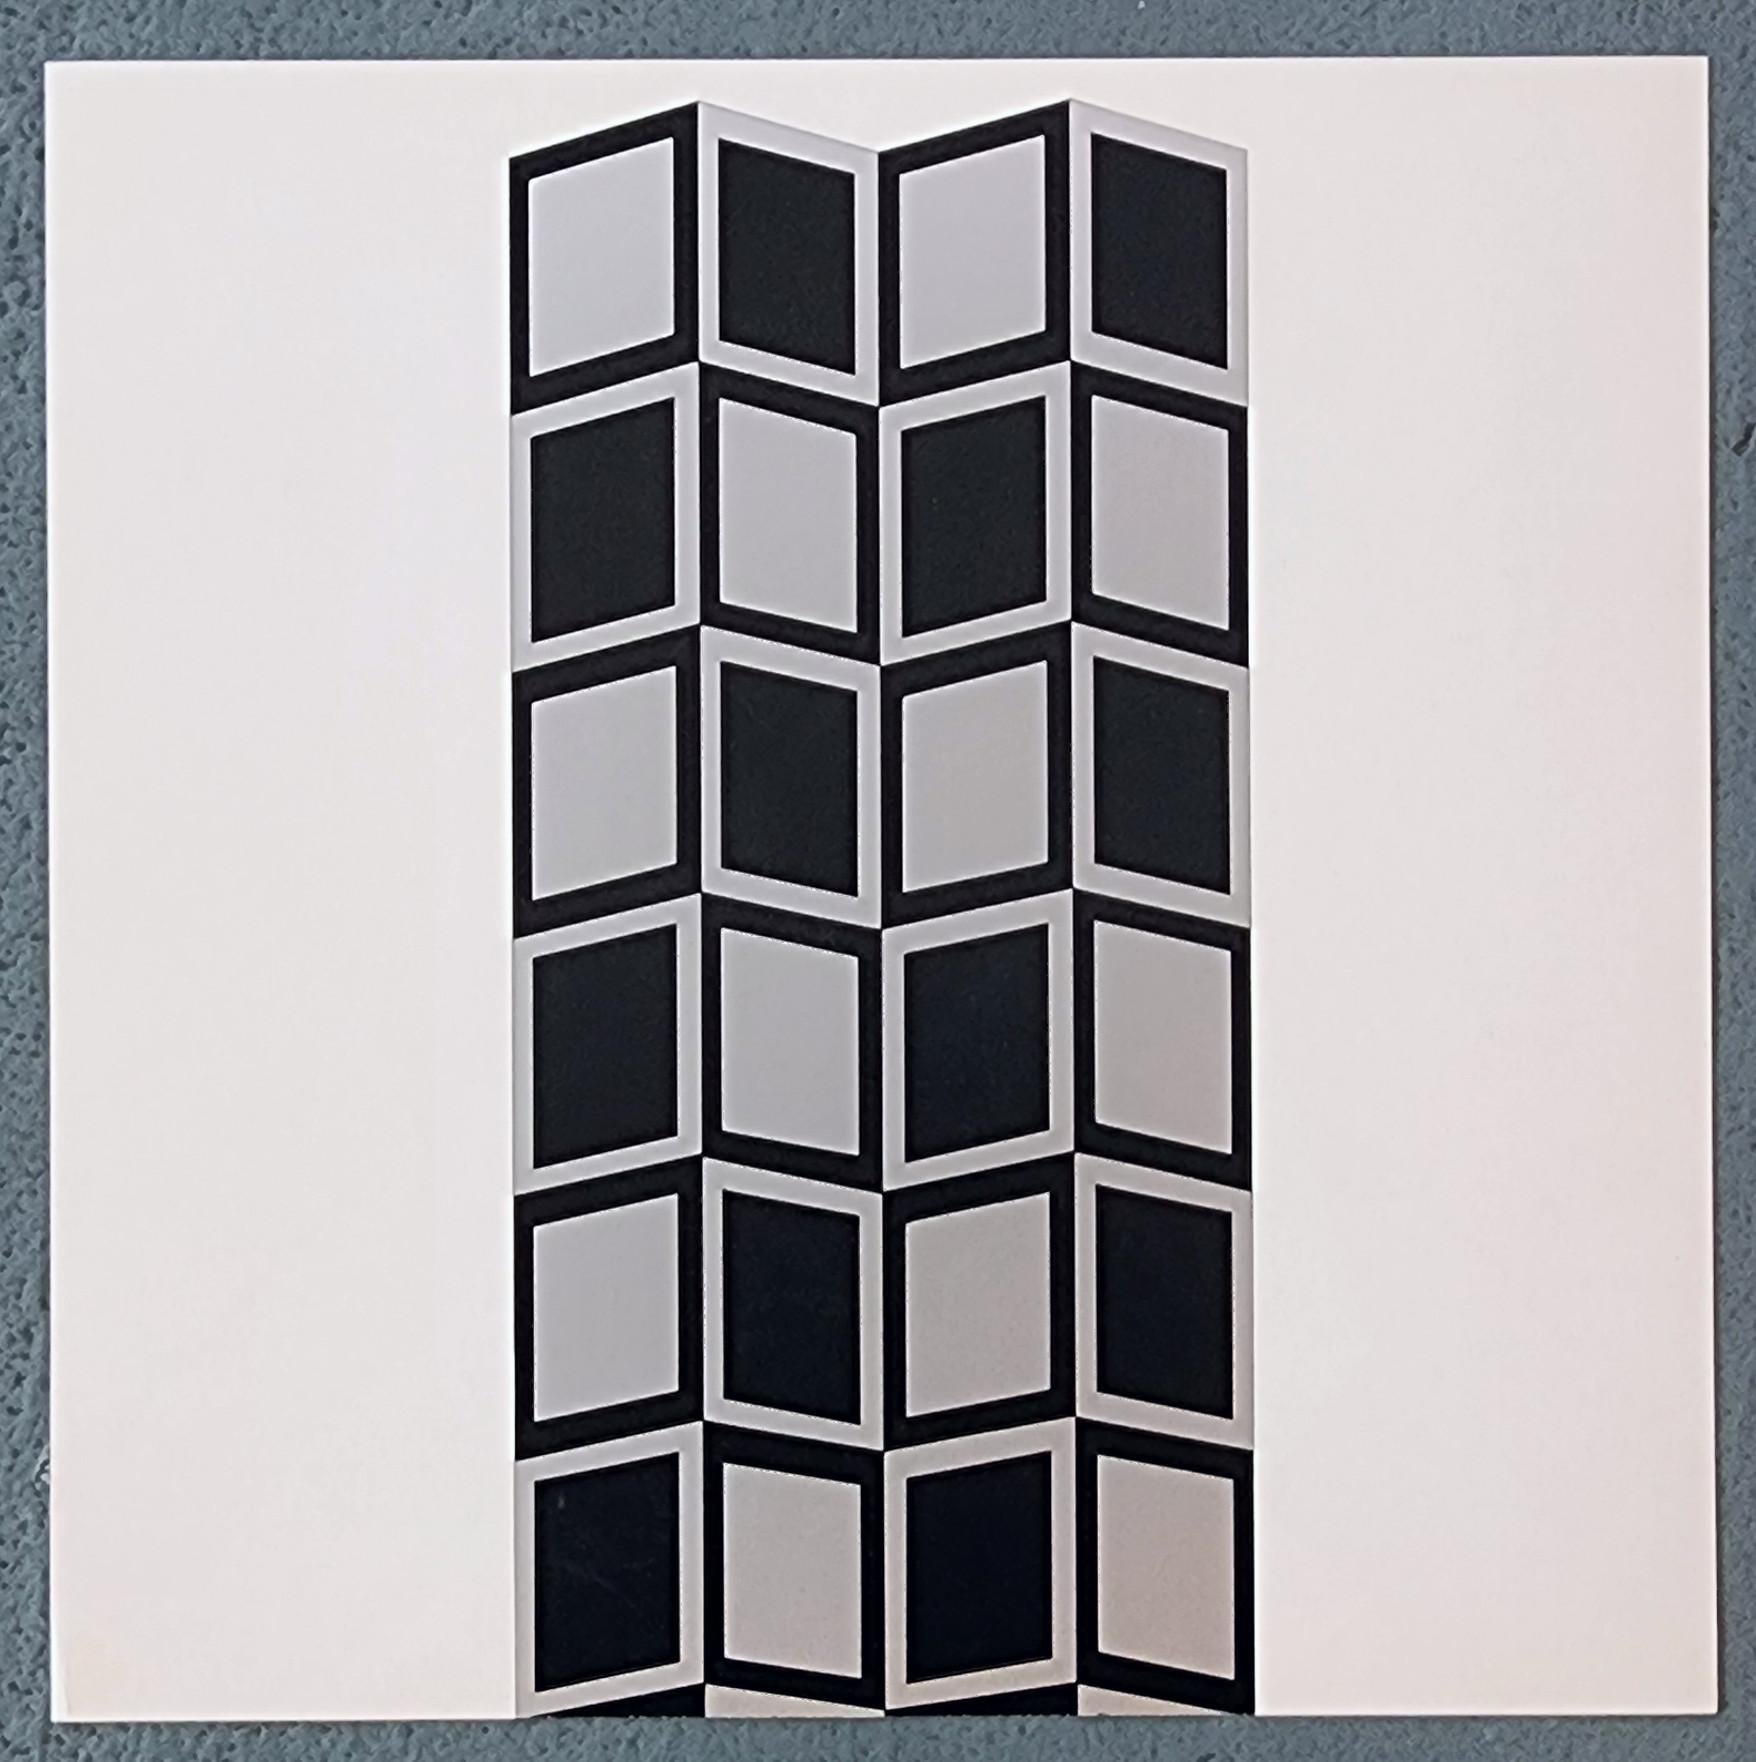 Saeule HK (Detail), 1967 (~36% OFF LIMITED TIME ONLY) (Op-Art), Print, von Victor Vasarely